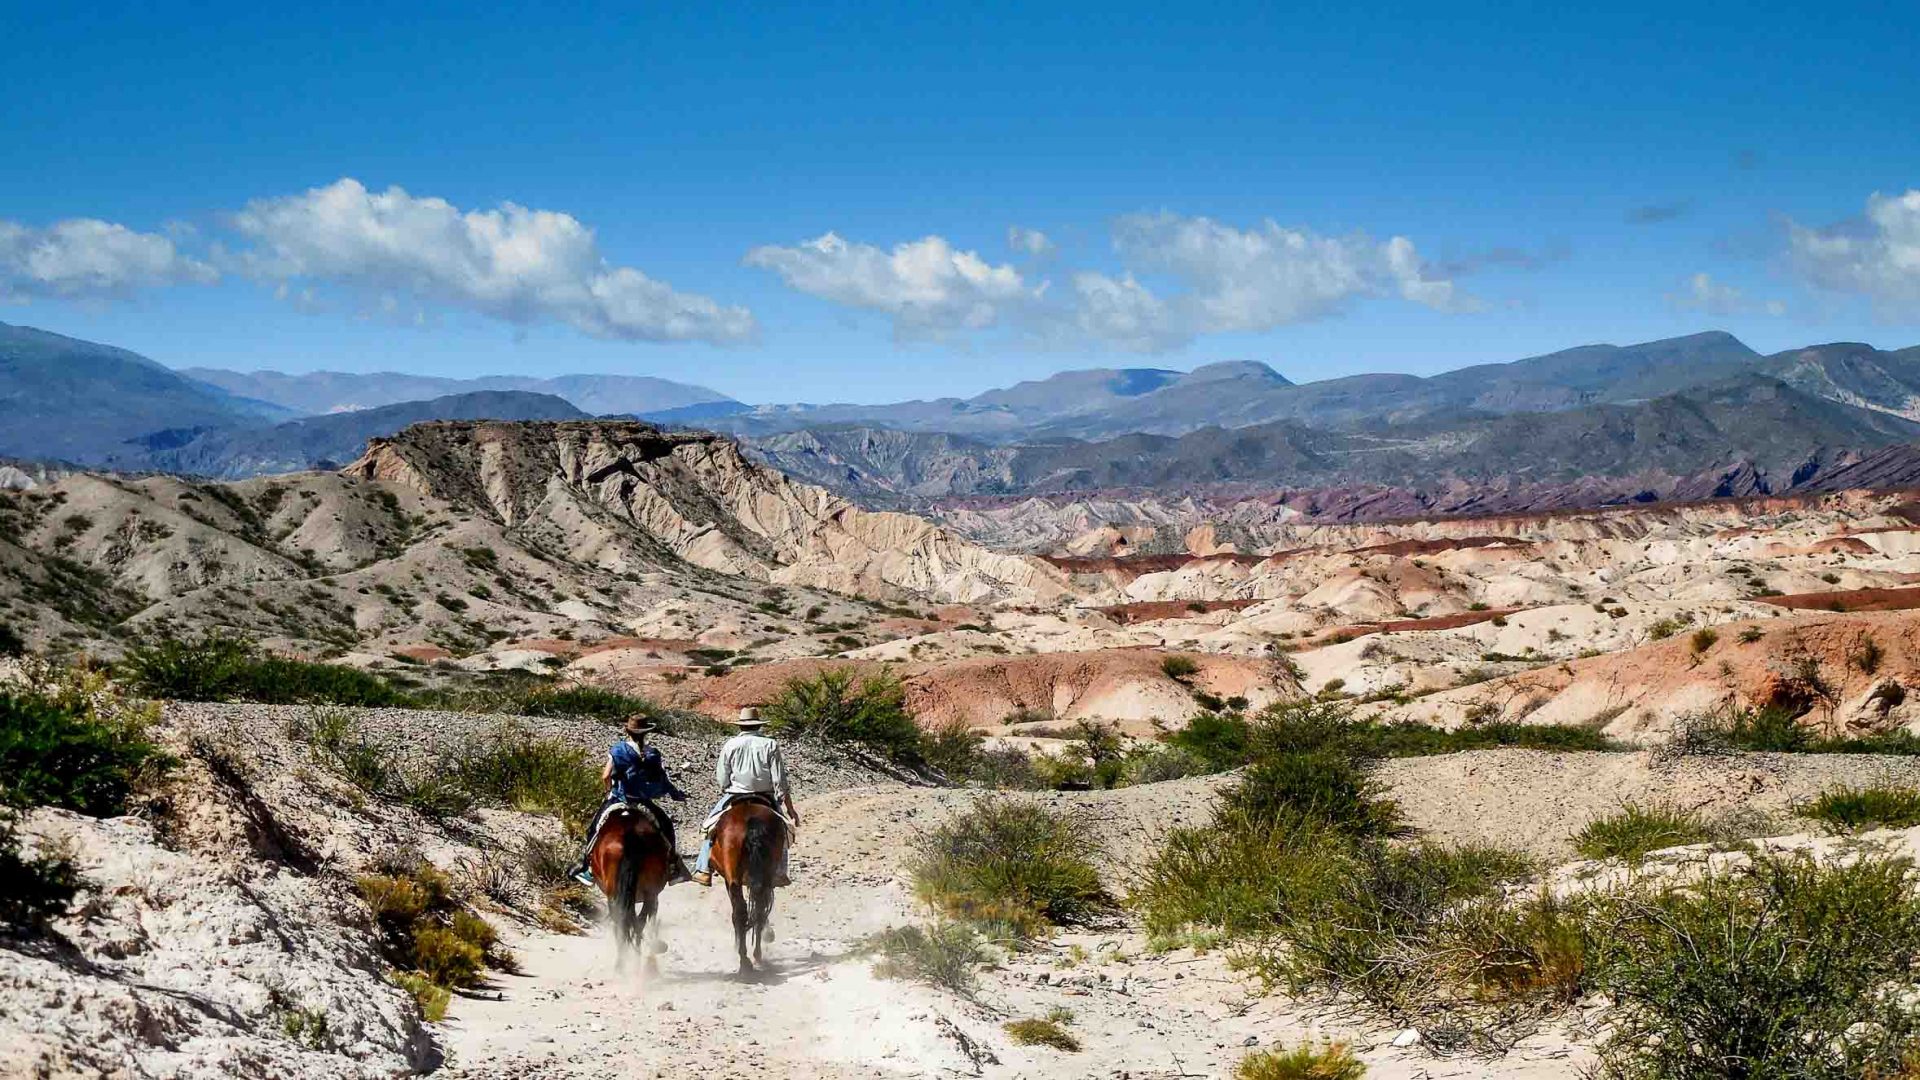 Forget Patagonia, could Salta be Argentina’s next adventure playground?